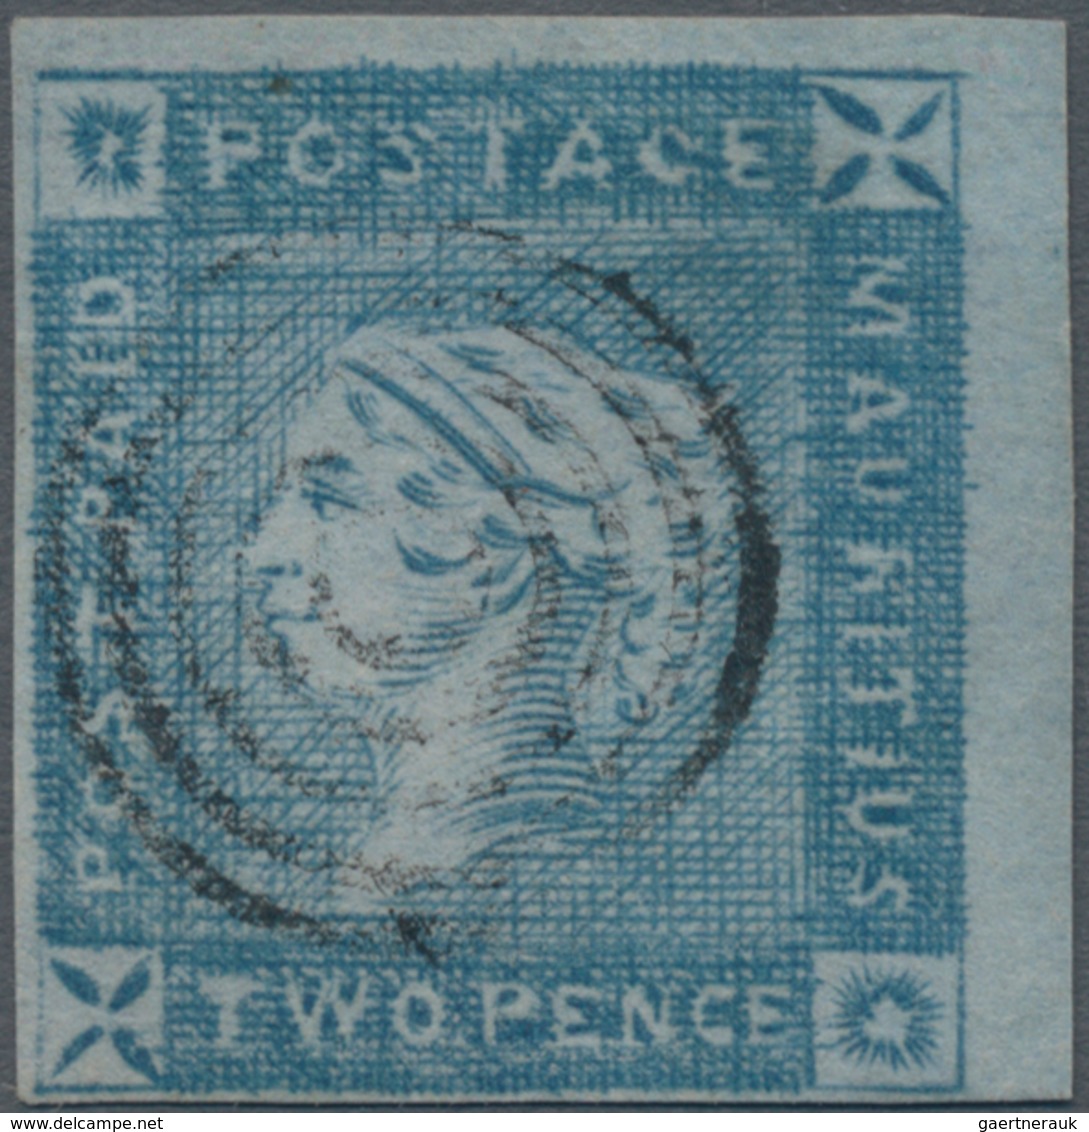 Mauritius: 1859, "Lapirot" TWO PENCE Blue, Early Impression, Full To Huge Margins All Around, Minime - Mauritius (...-1967)